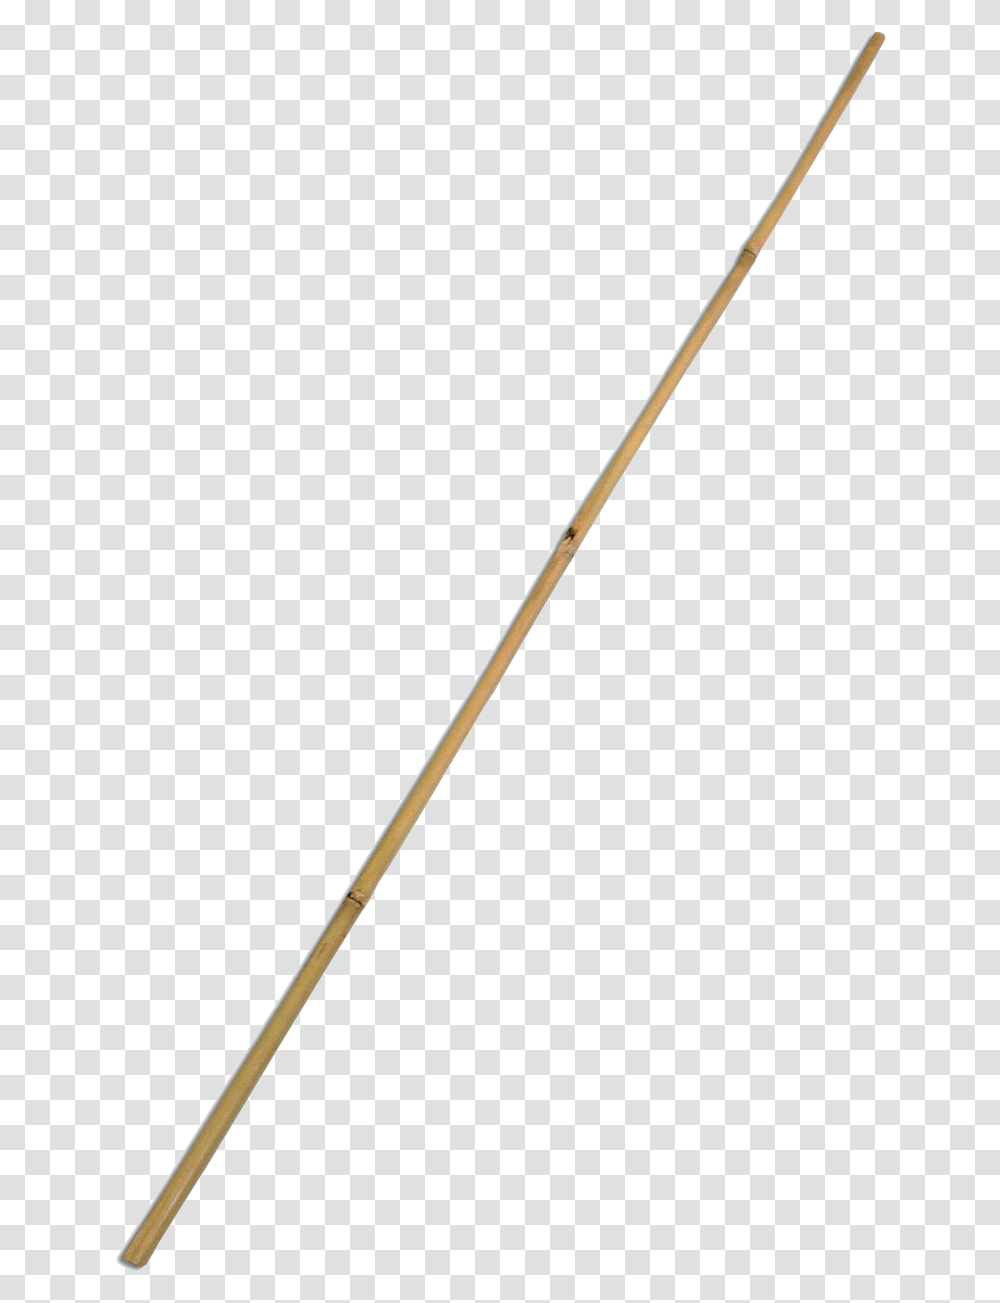 Bamboo Stick Picture Pool Stick Clip Art, Weapon, Weaponry, Spear Transparent Png